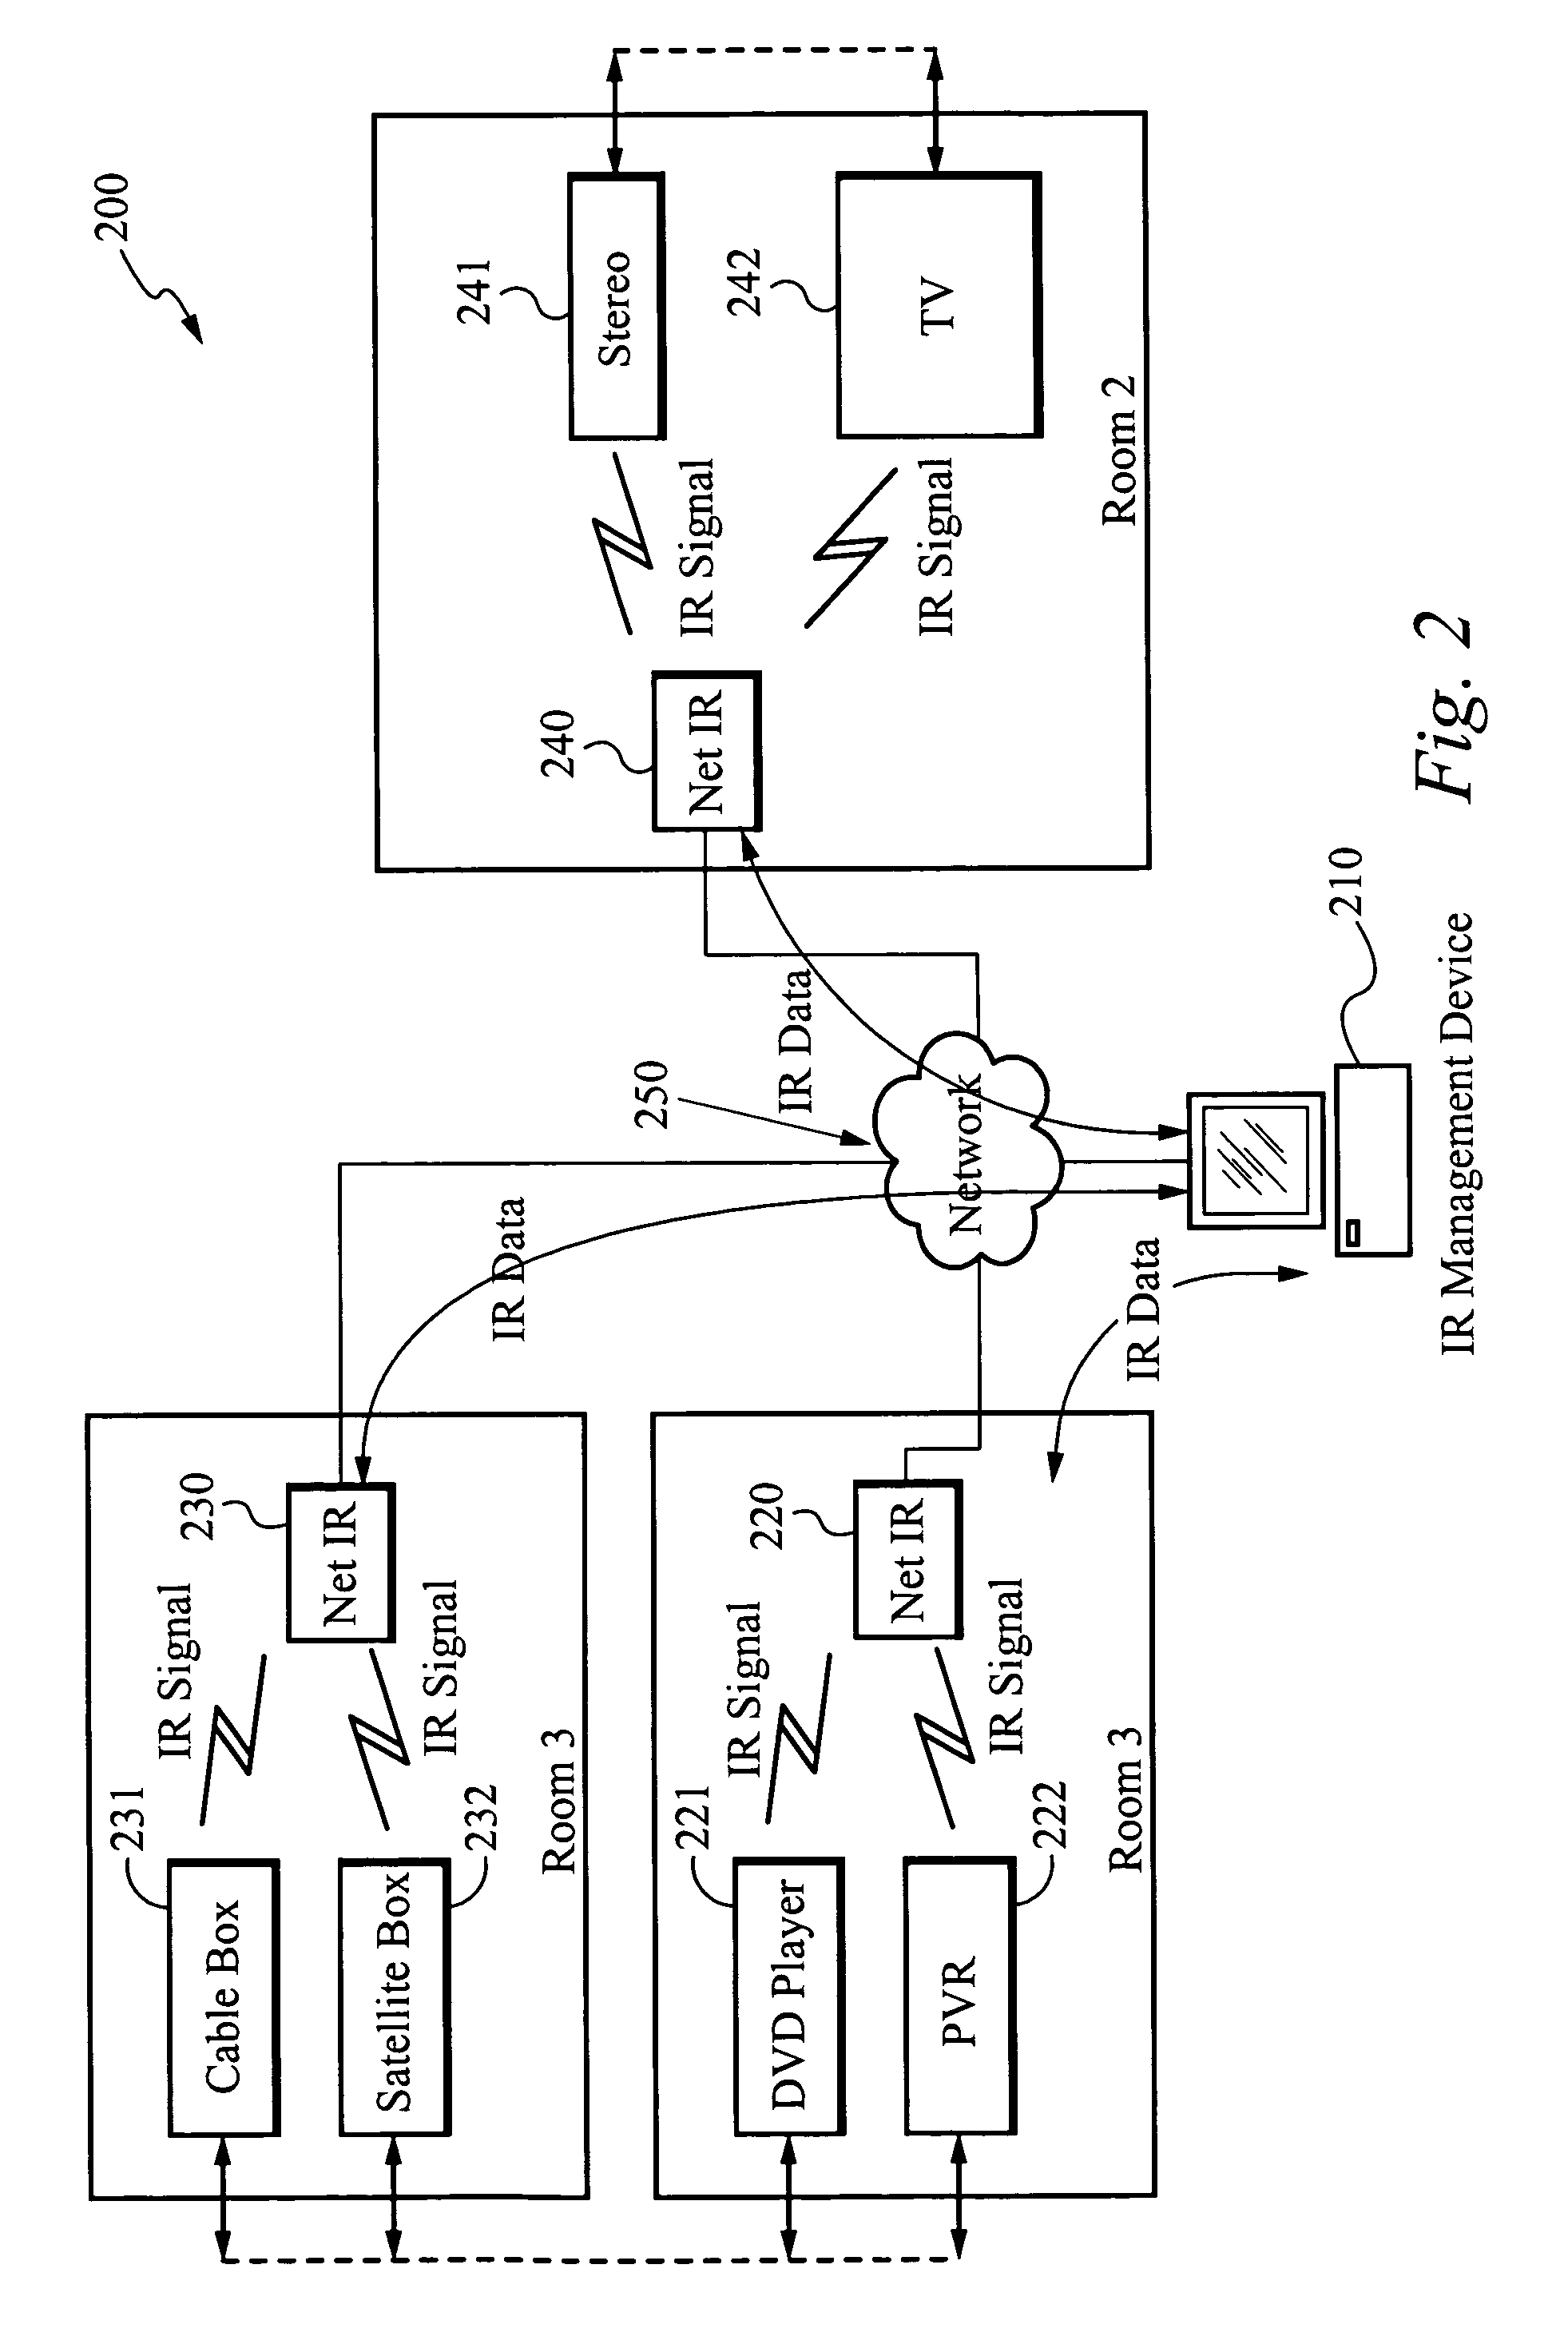 Infrared signal distribution and management system and method